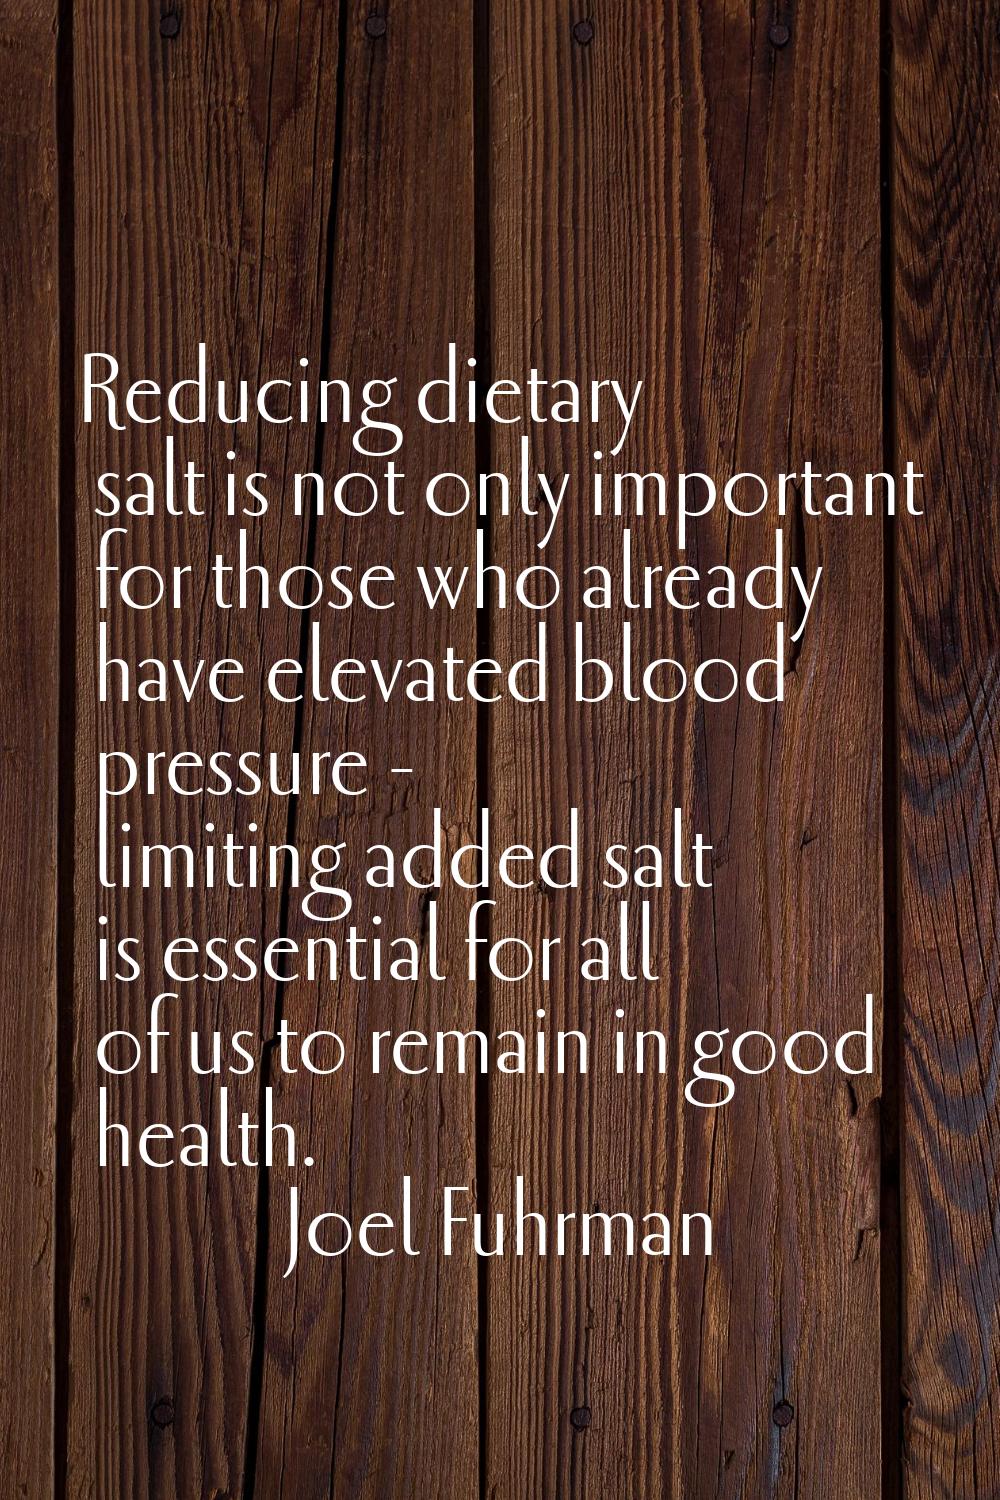 Reducing dietary salt is not only important for those who already have elevated blood pressure - li